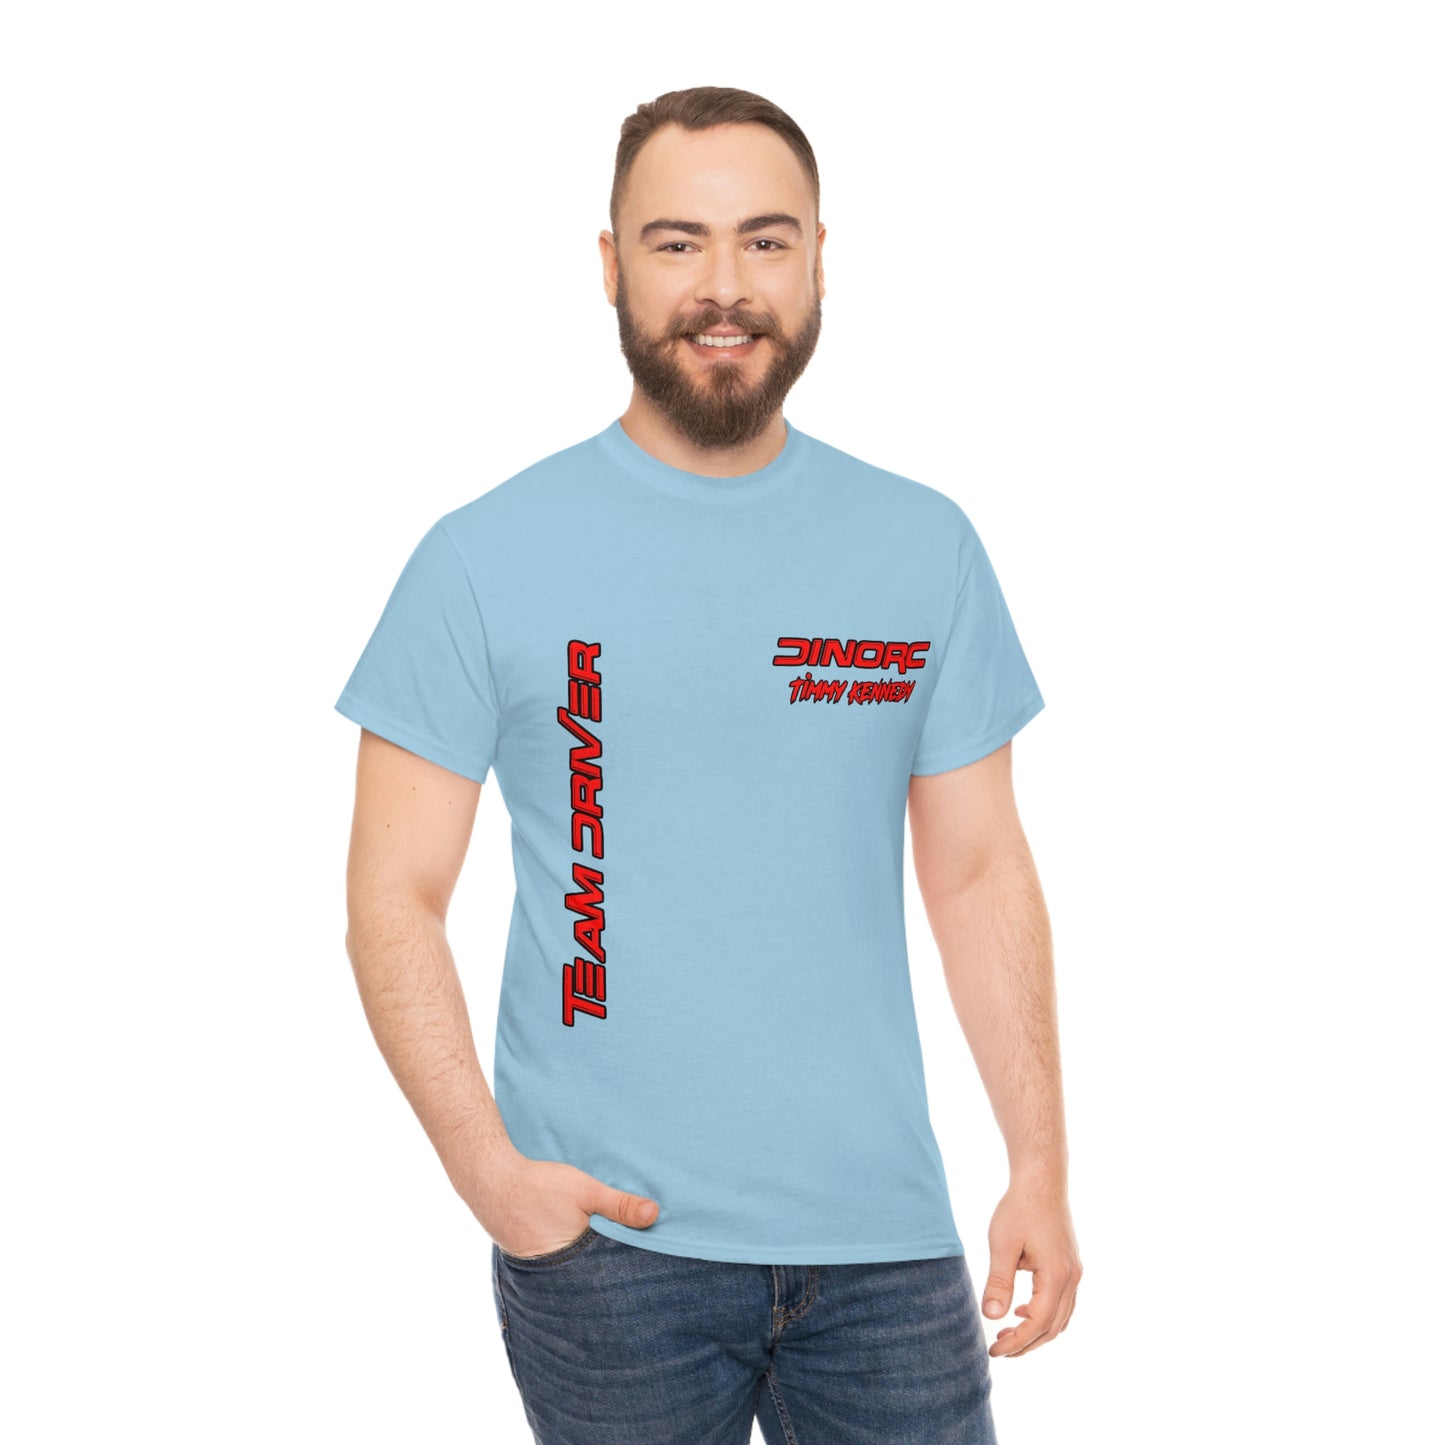 Team Driver Timmy Kennedy Front and Back DinoRc Logo T-Shirt S-5x 5 colors